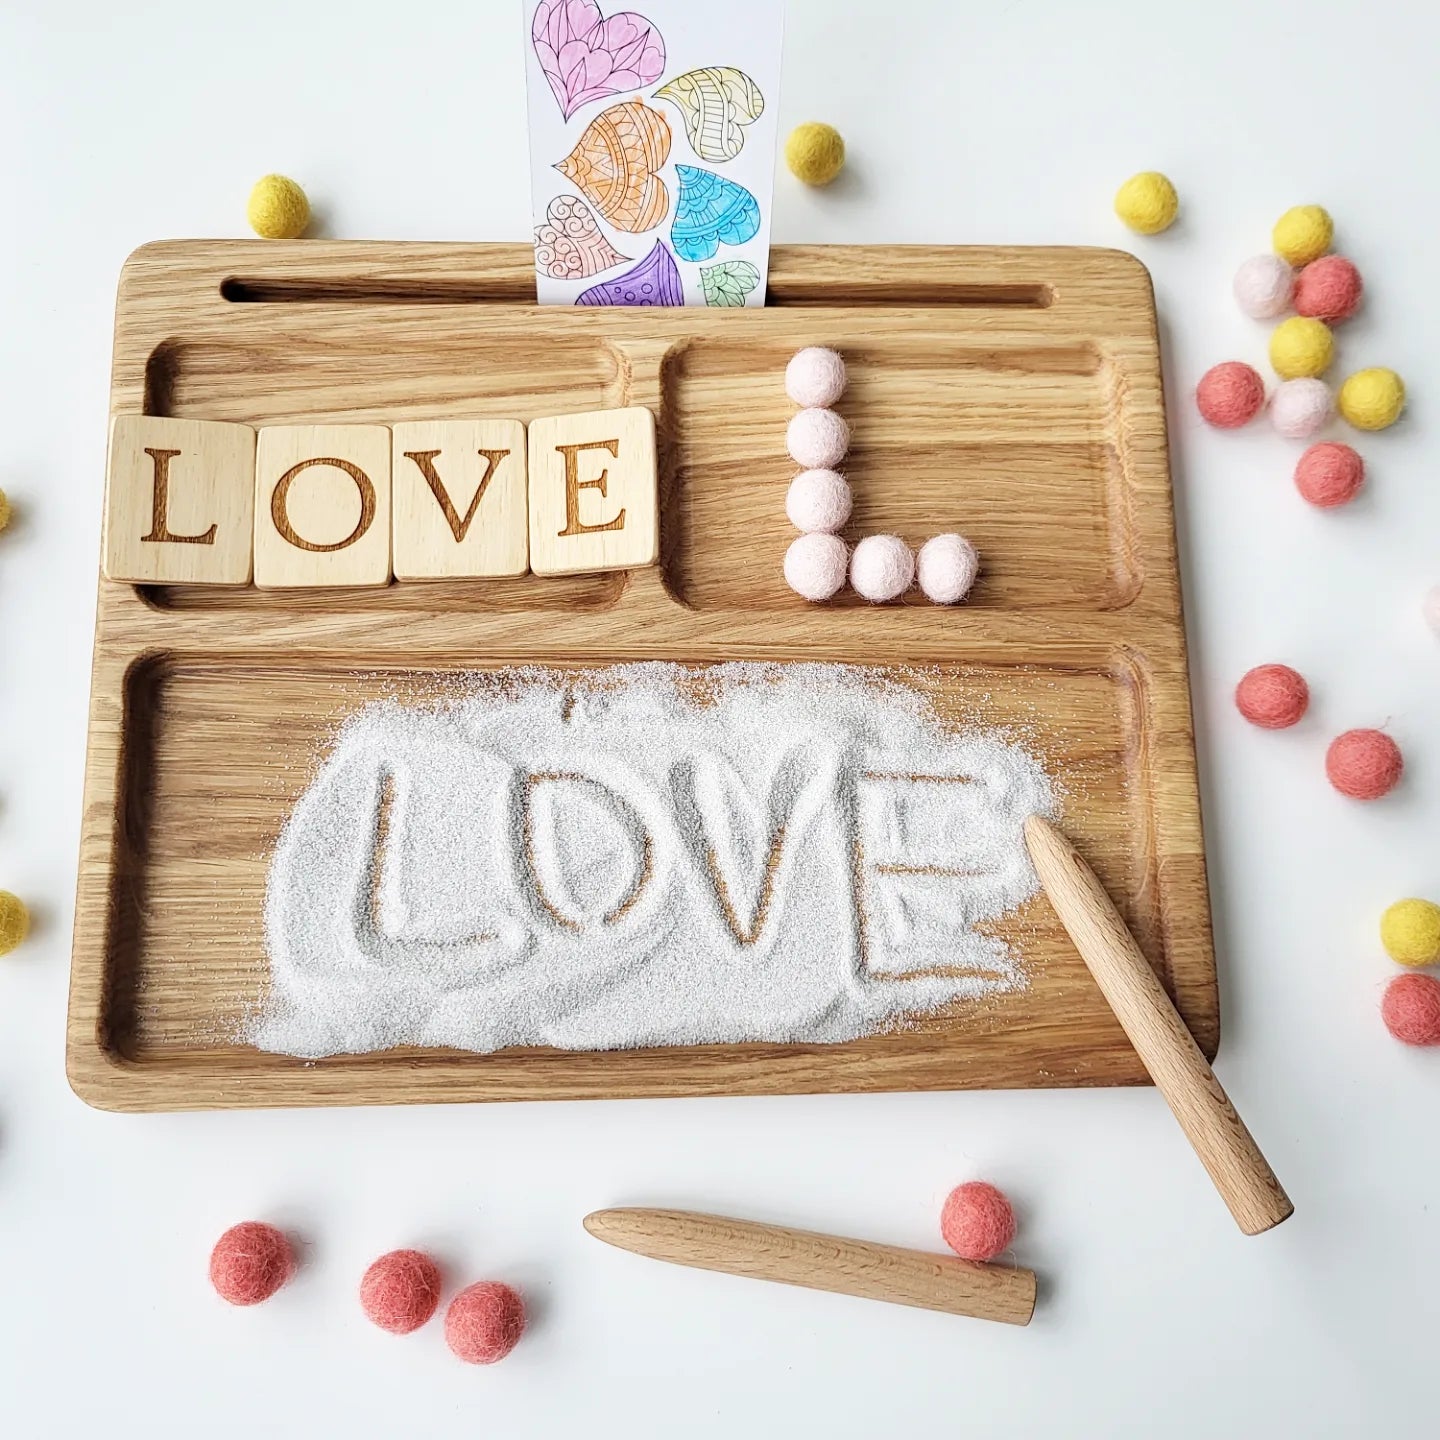 Read, write, create sand tray with letters cards, preschool, homeschool, learning letters, toddler gift, educational materials, Montessori